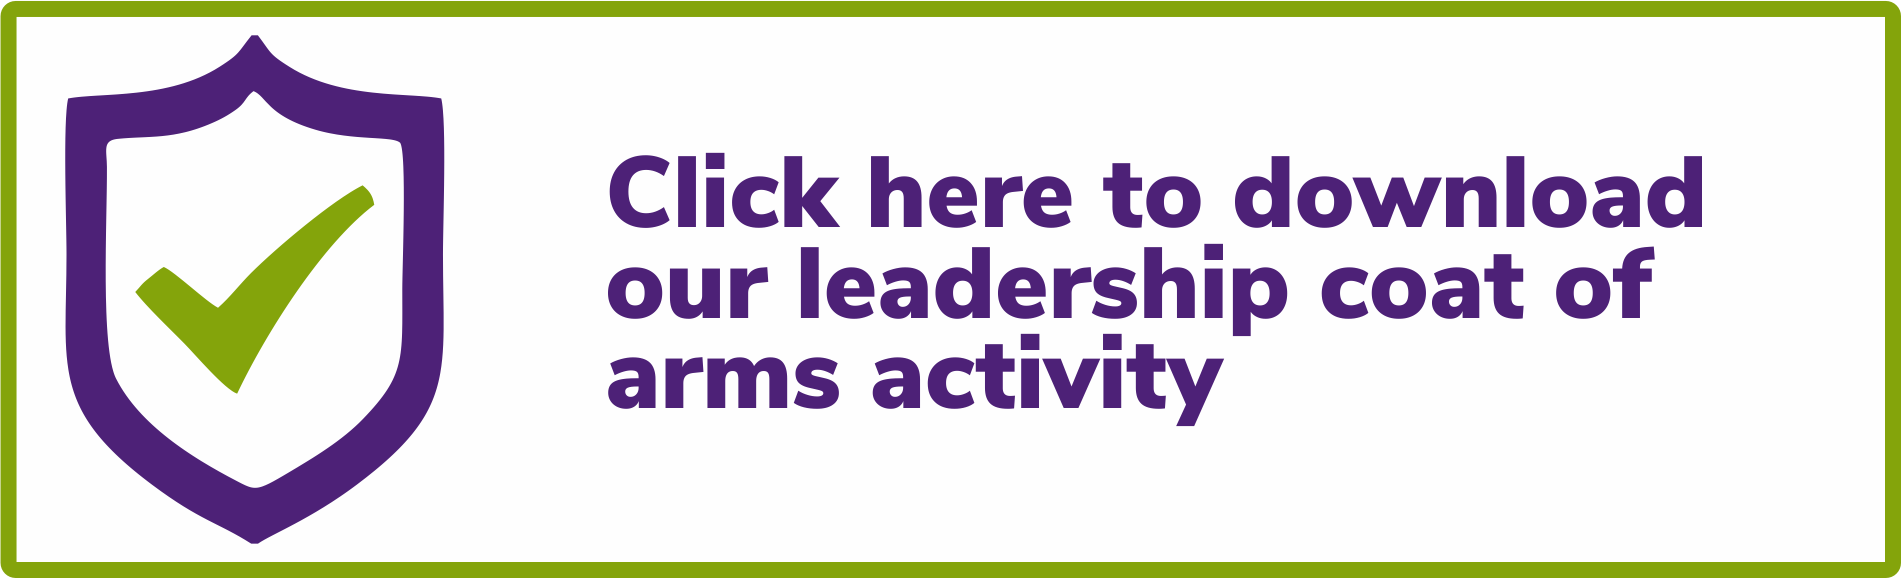 Click here to download our leadership coat of arms activity 